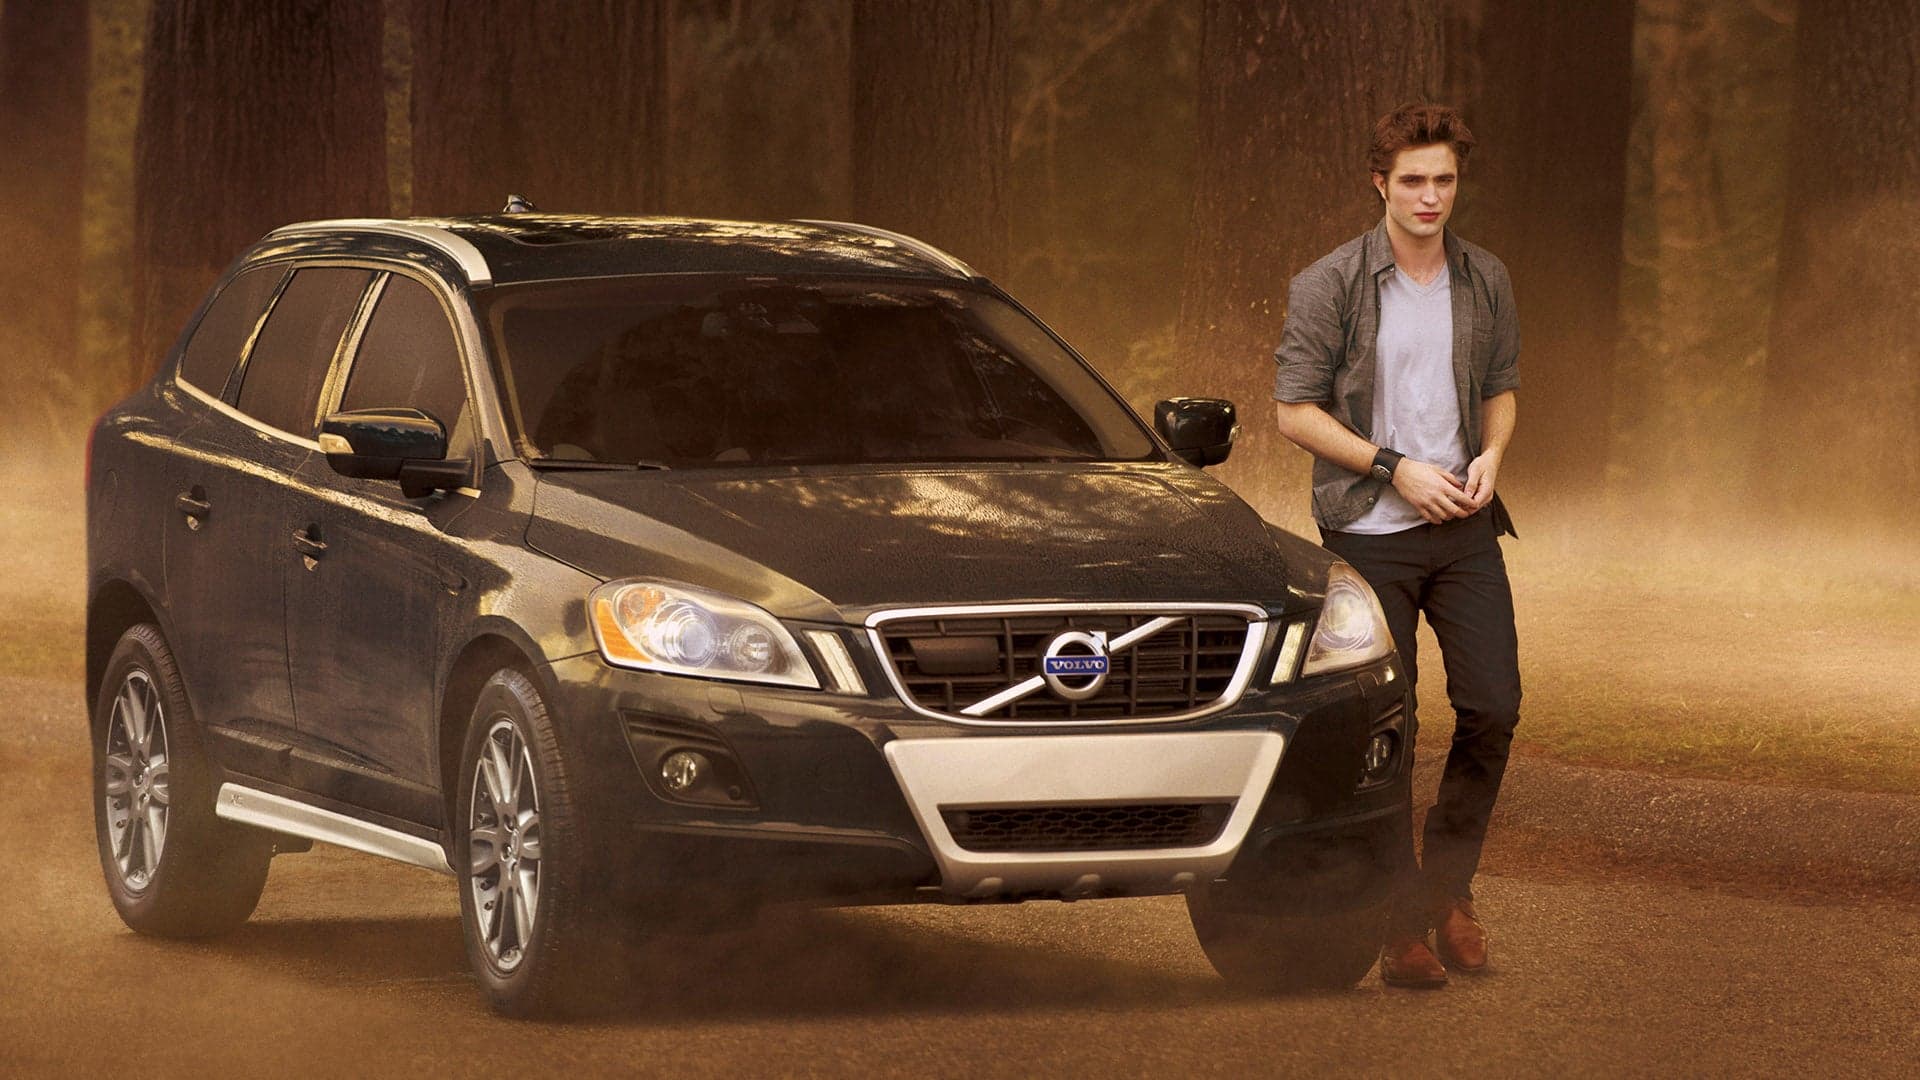 The Biggest Crime the Twilight Movies Committed Had to Do With a Volvo